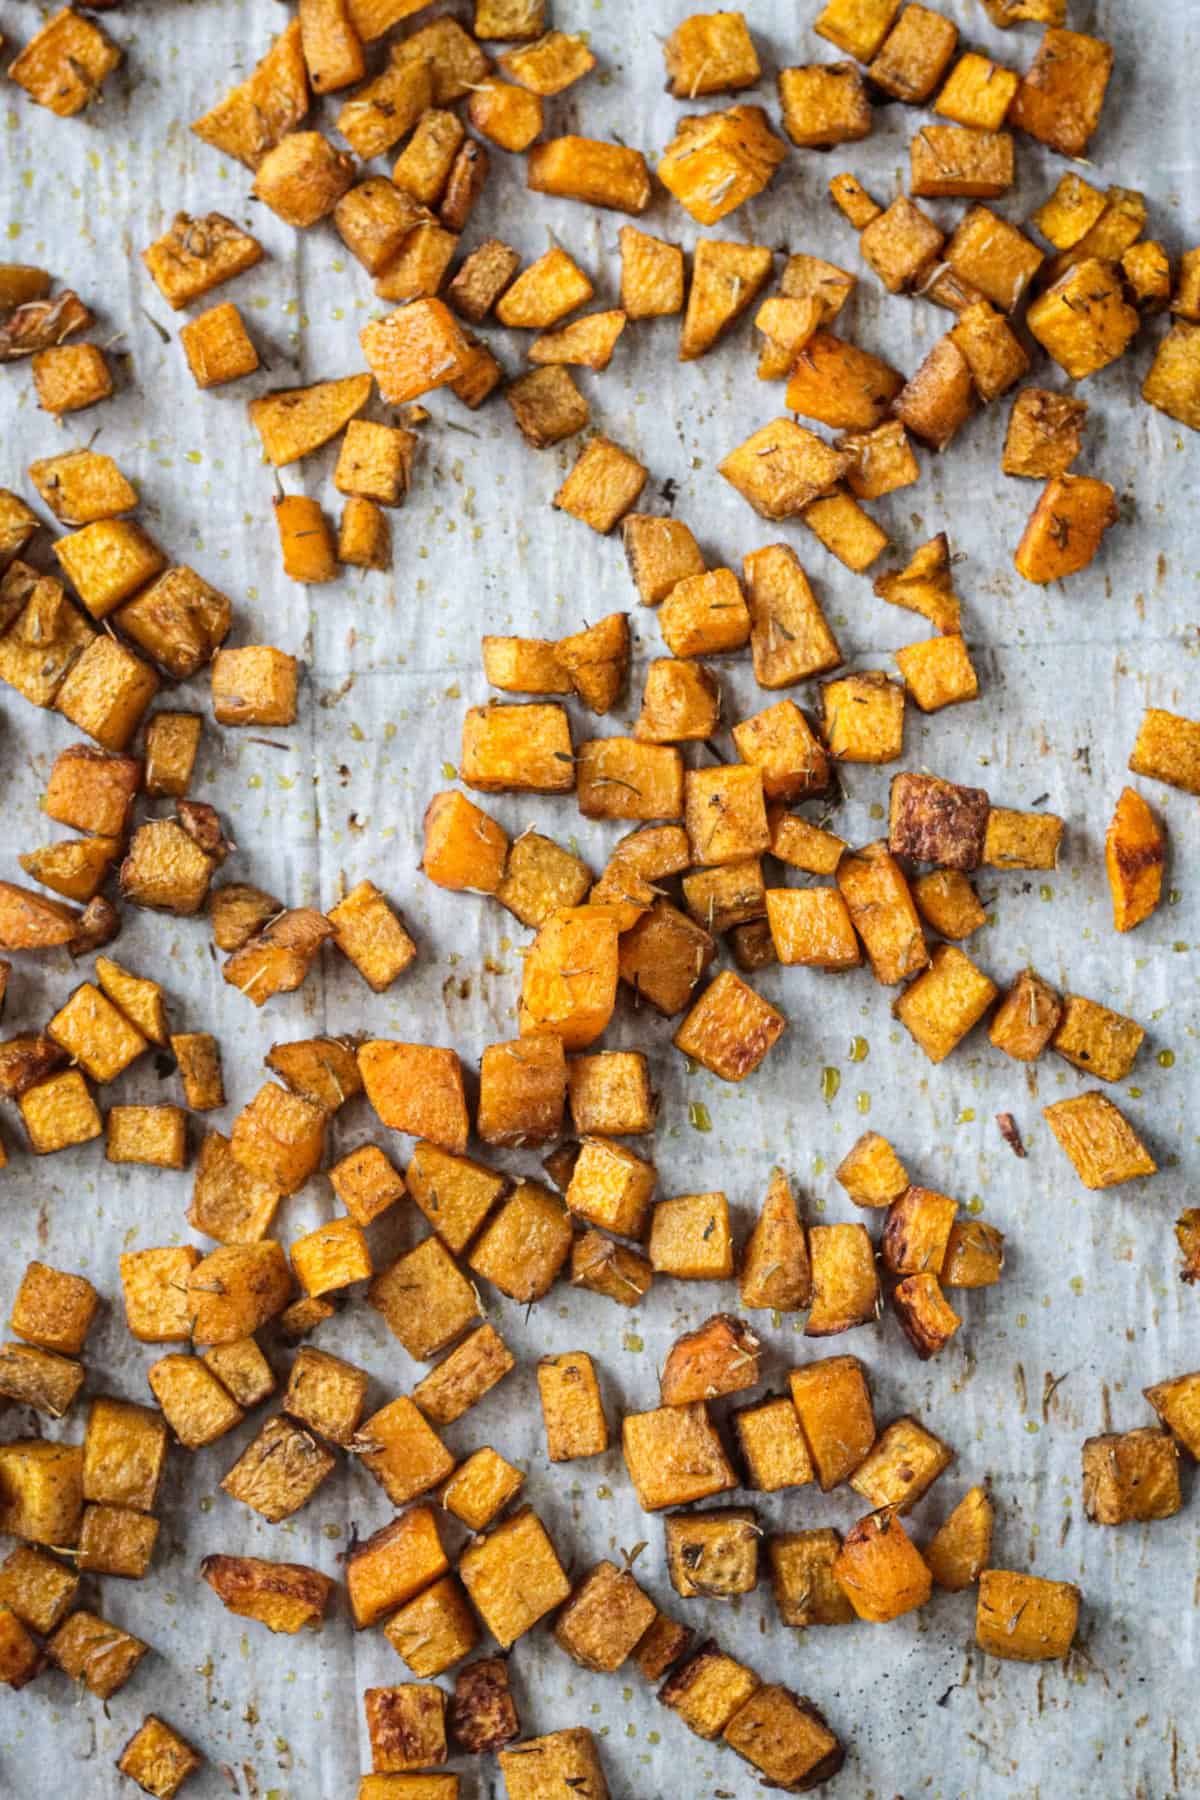 Roasted diced butternut squash on a parchment lined baking sheet.